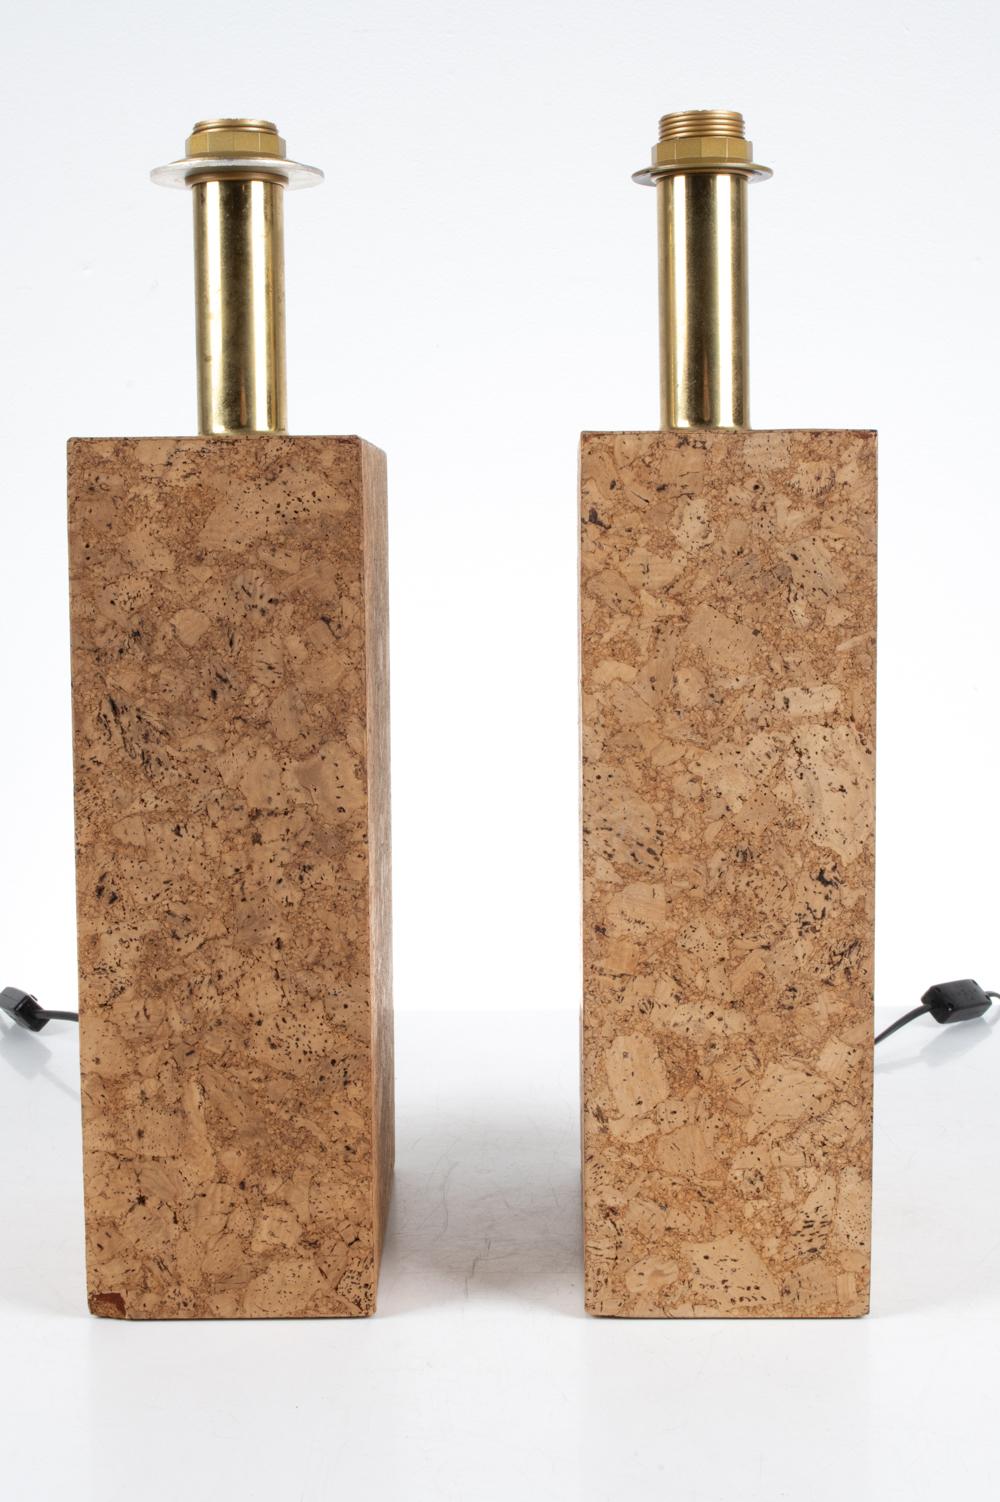 Pair of Cork Monolith Table Lamps in the Stye of Ingo Maurer, c. 1970's For Sale 4